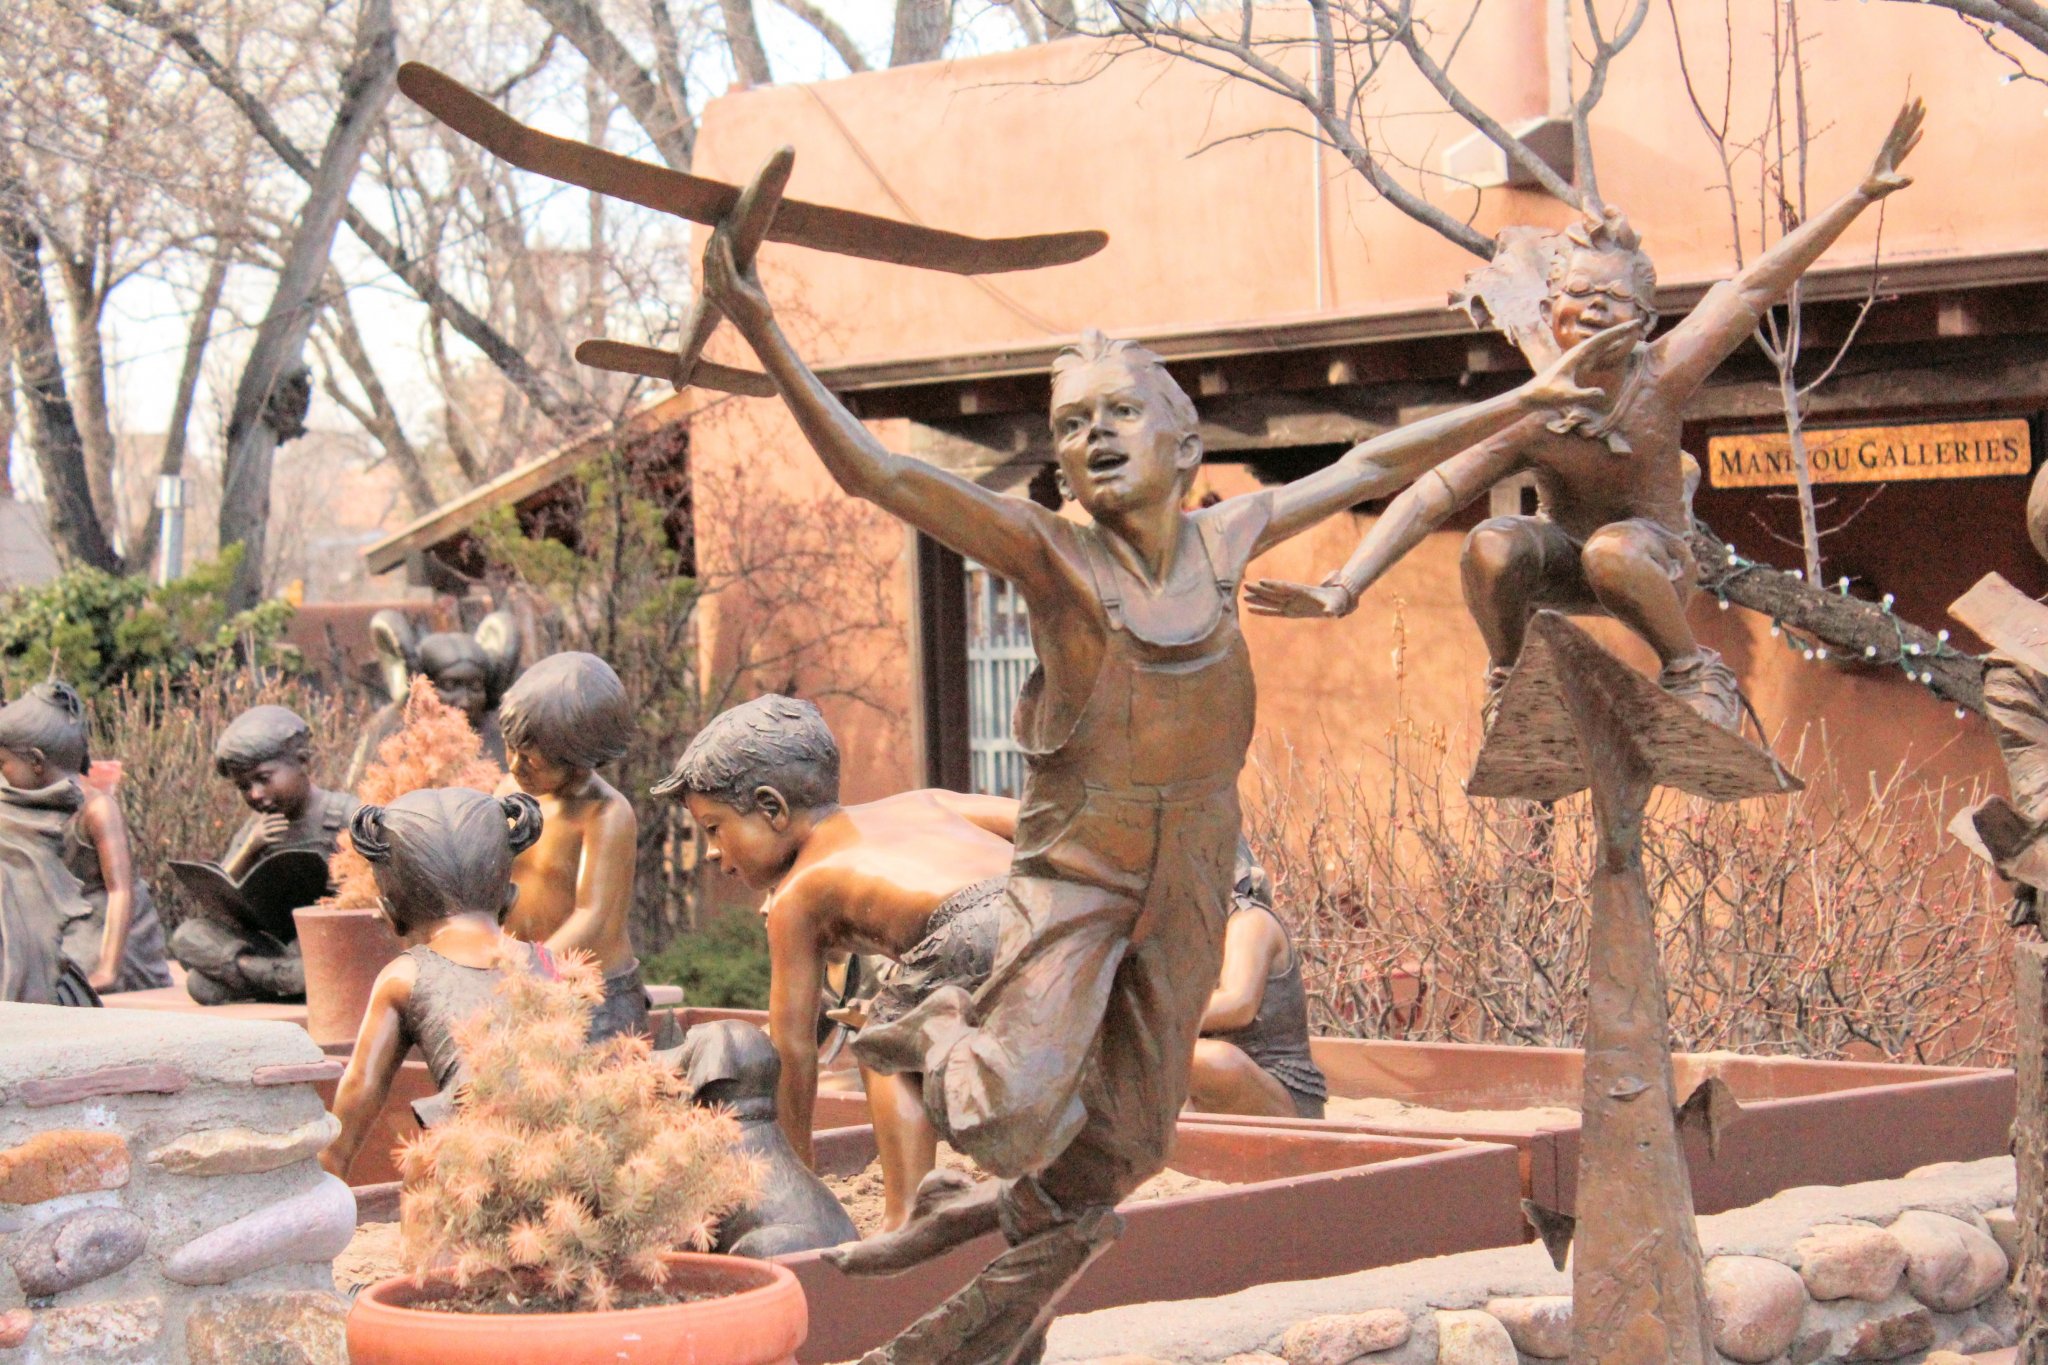 Guide to Canyon Road: Statues of Children in Meyers Gallery